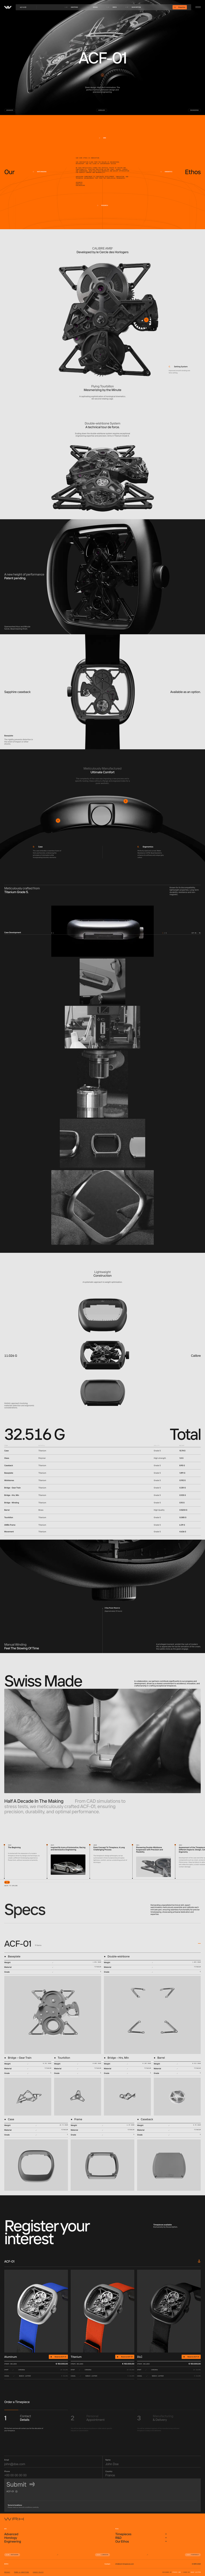 WRK Landing Page Example: Innovation, precision engineering and timeless design, manufactured with passion in Switzerland. Explore our collection of timepieces inspired by motorsport, engineering excellence, and minimalist aesthetics.